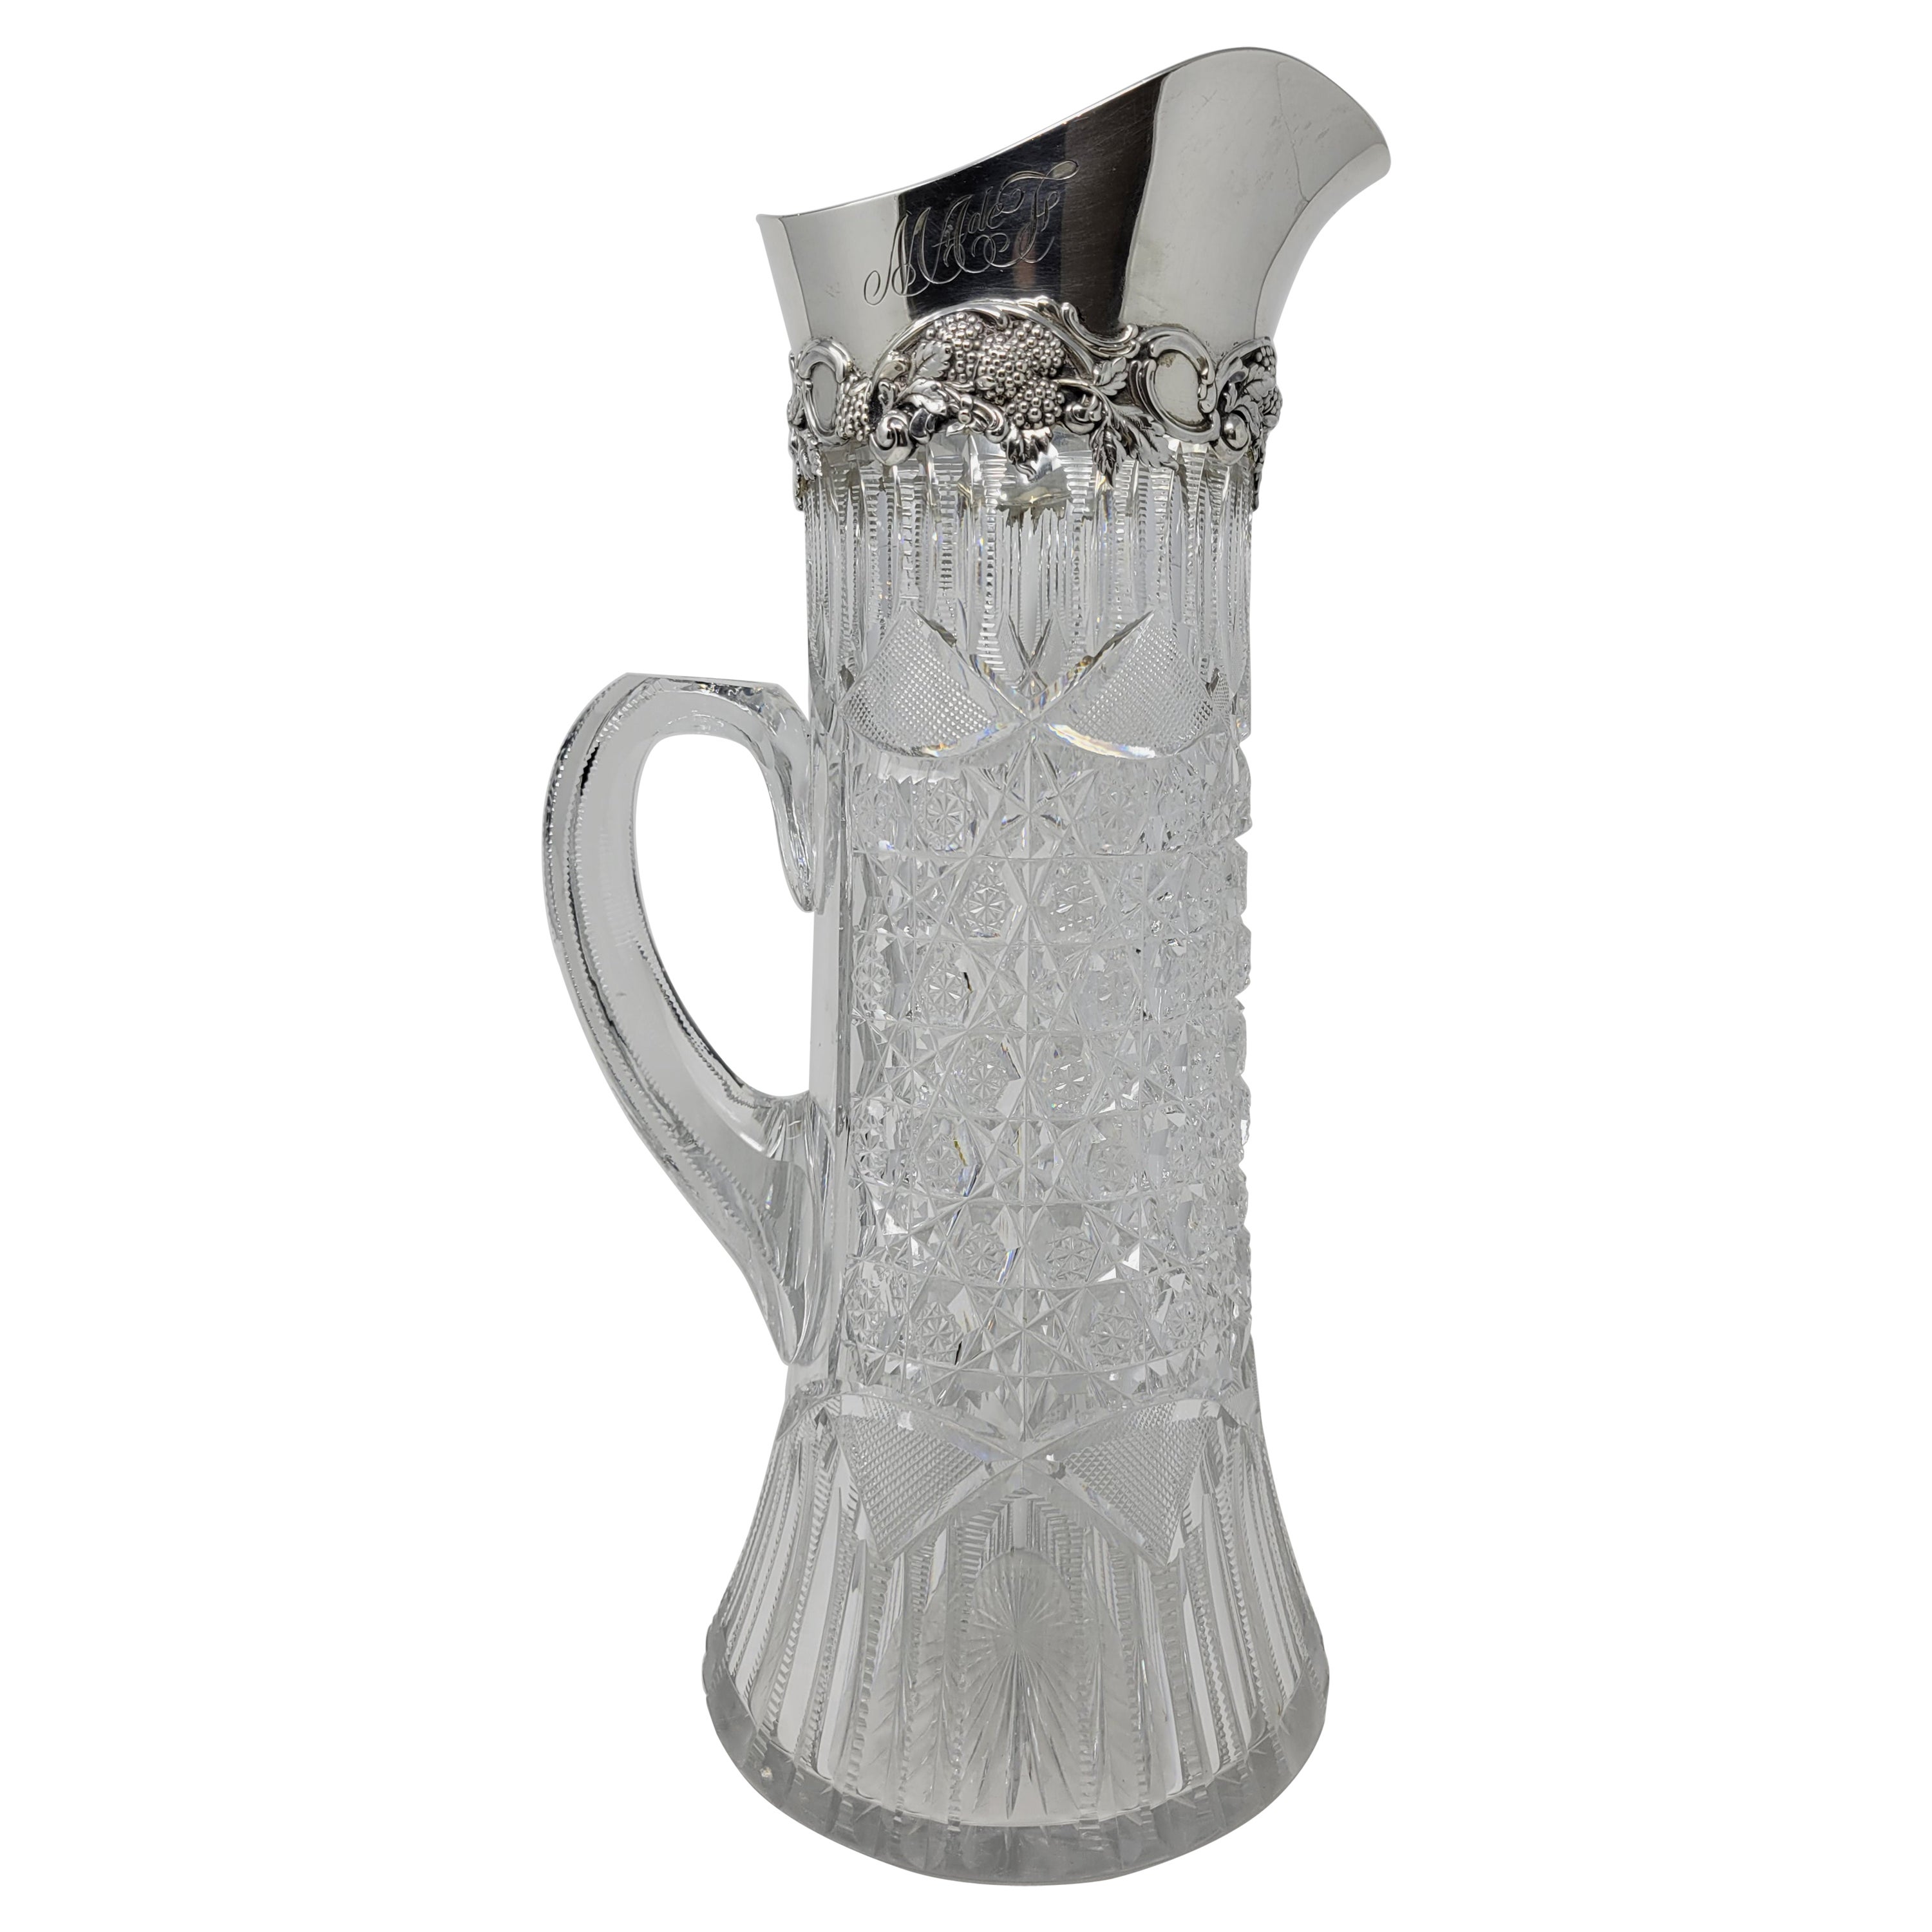 Antique American "Tiffany & Co." Sterling Silver & Cut Crystal Pitcher, Ca. 1890